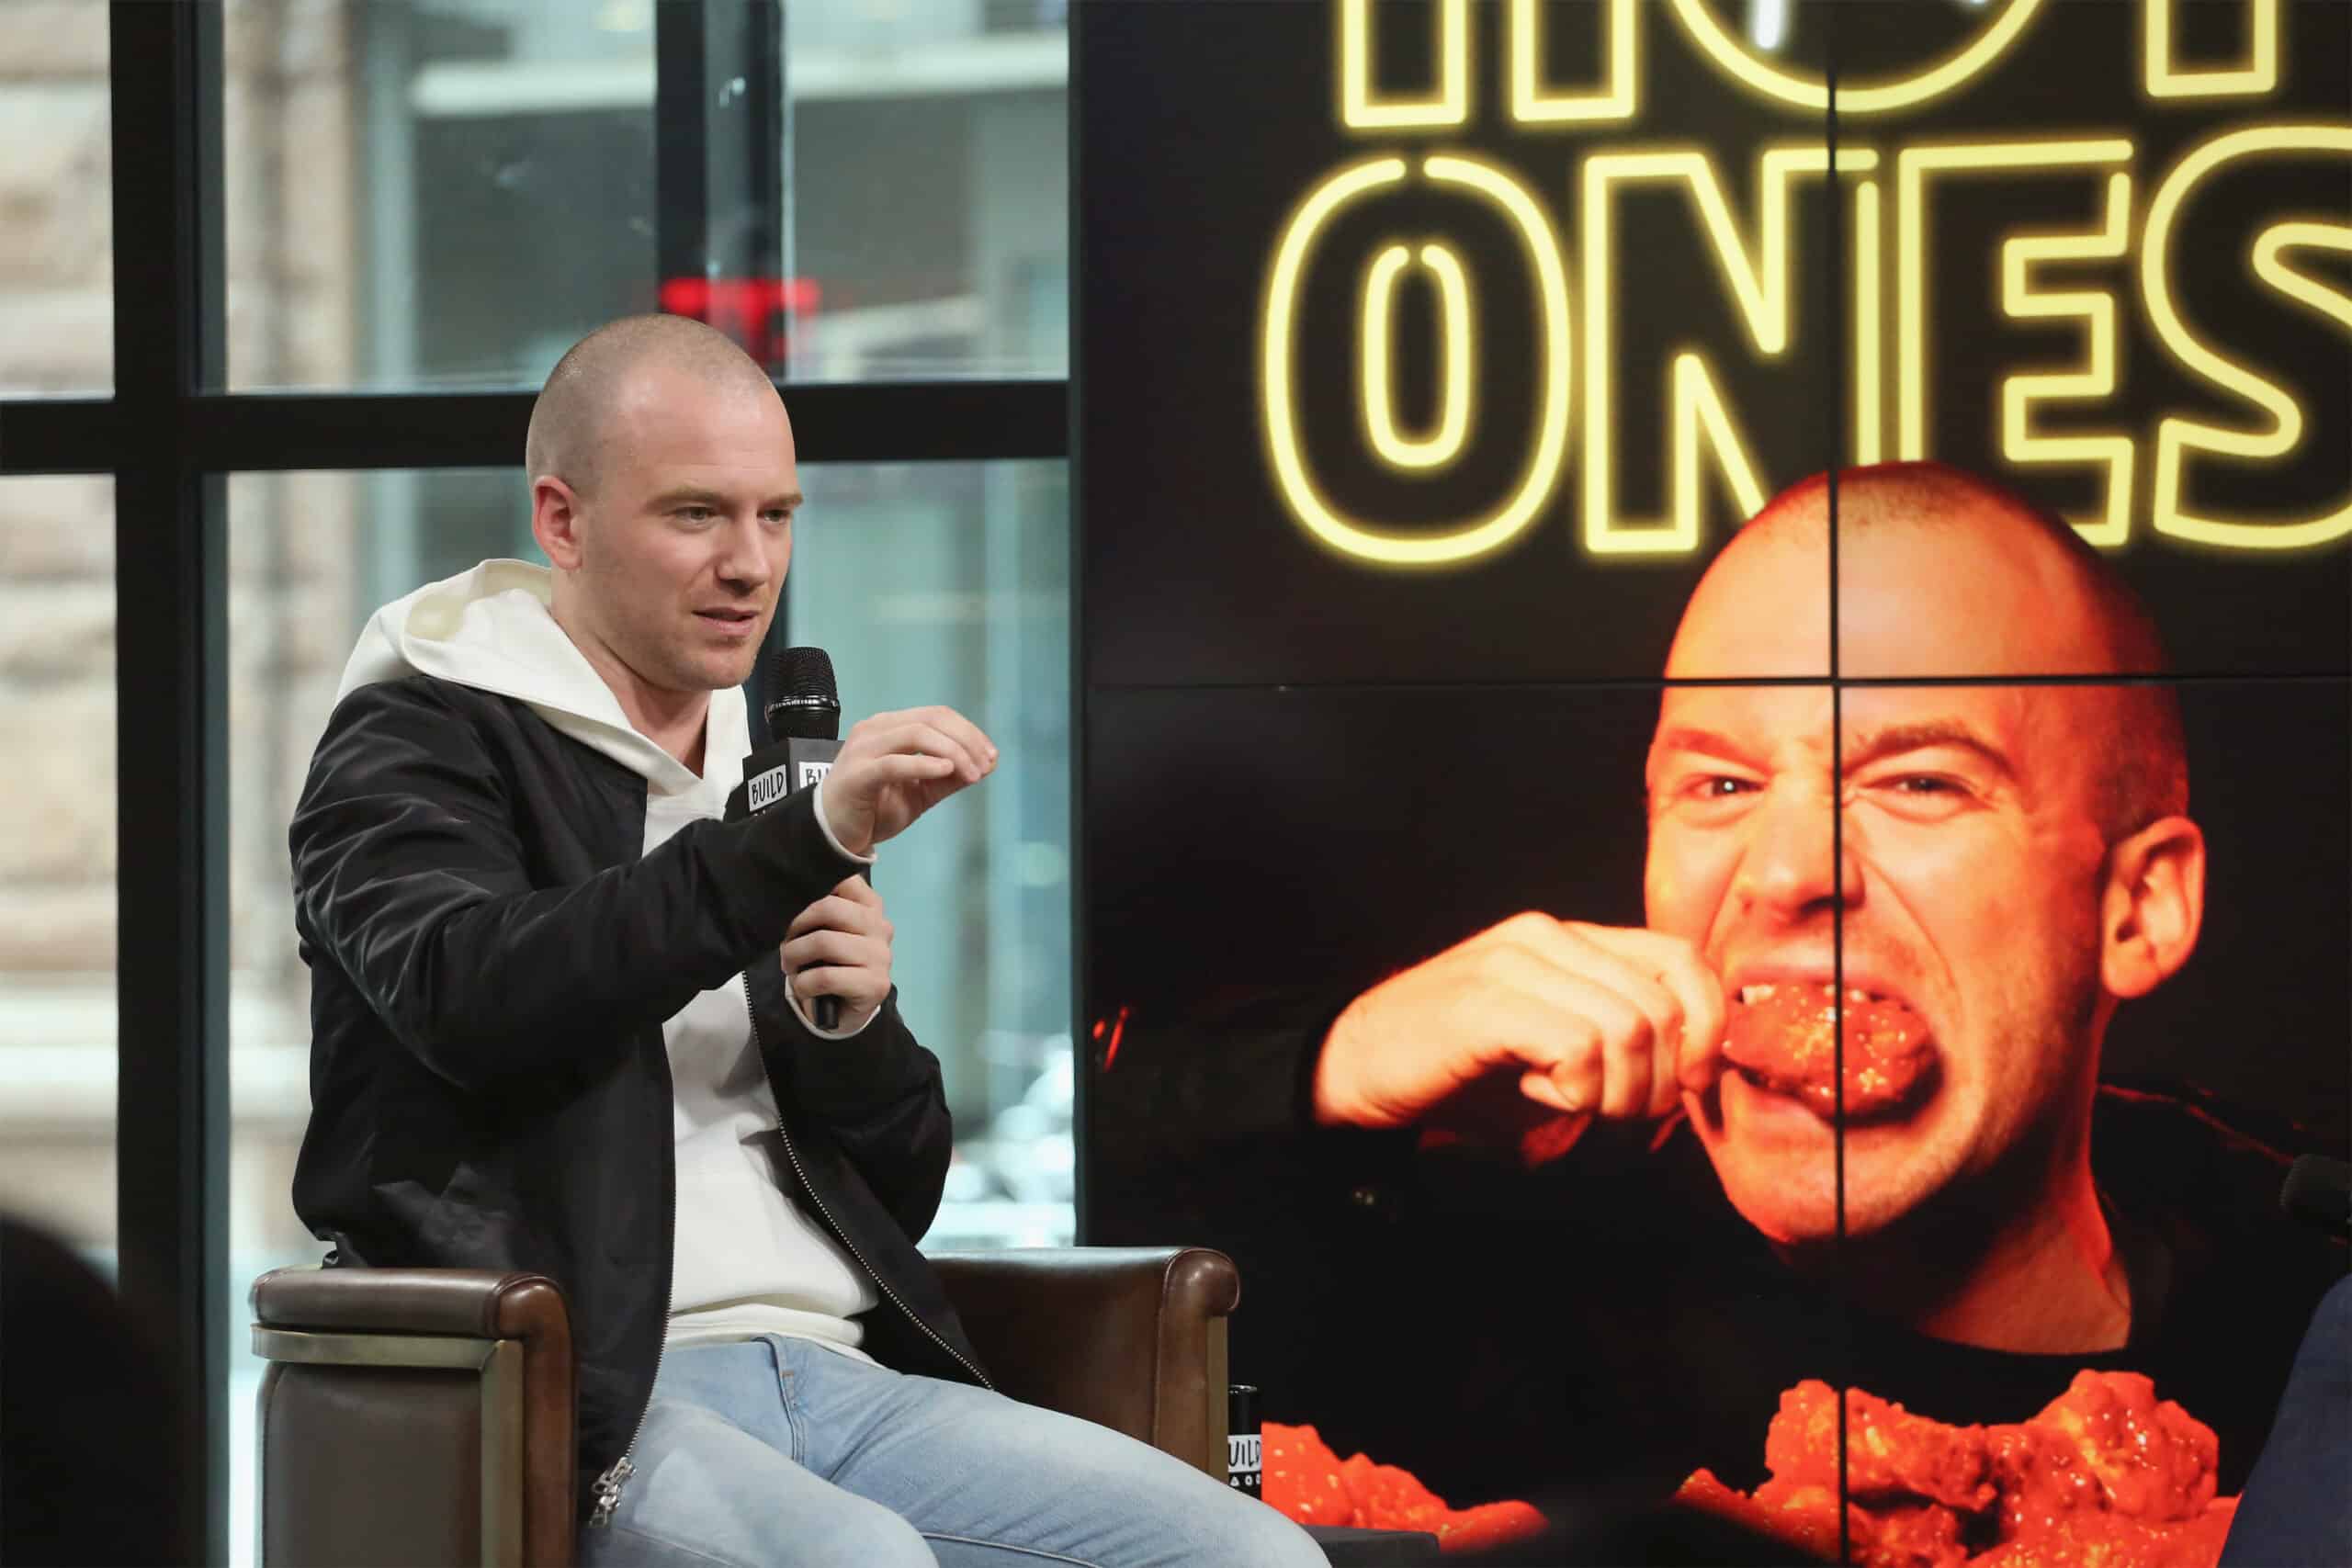 NEW YORK, NY - JUNE 08: Actor Sean Evans visits Build to discuss "Hot Ones" at Build Studio on June 8, 2017 in New York City.